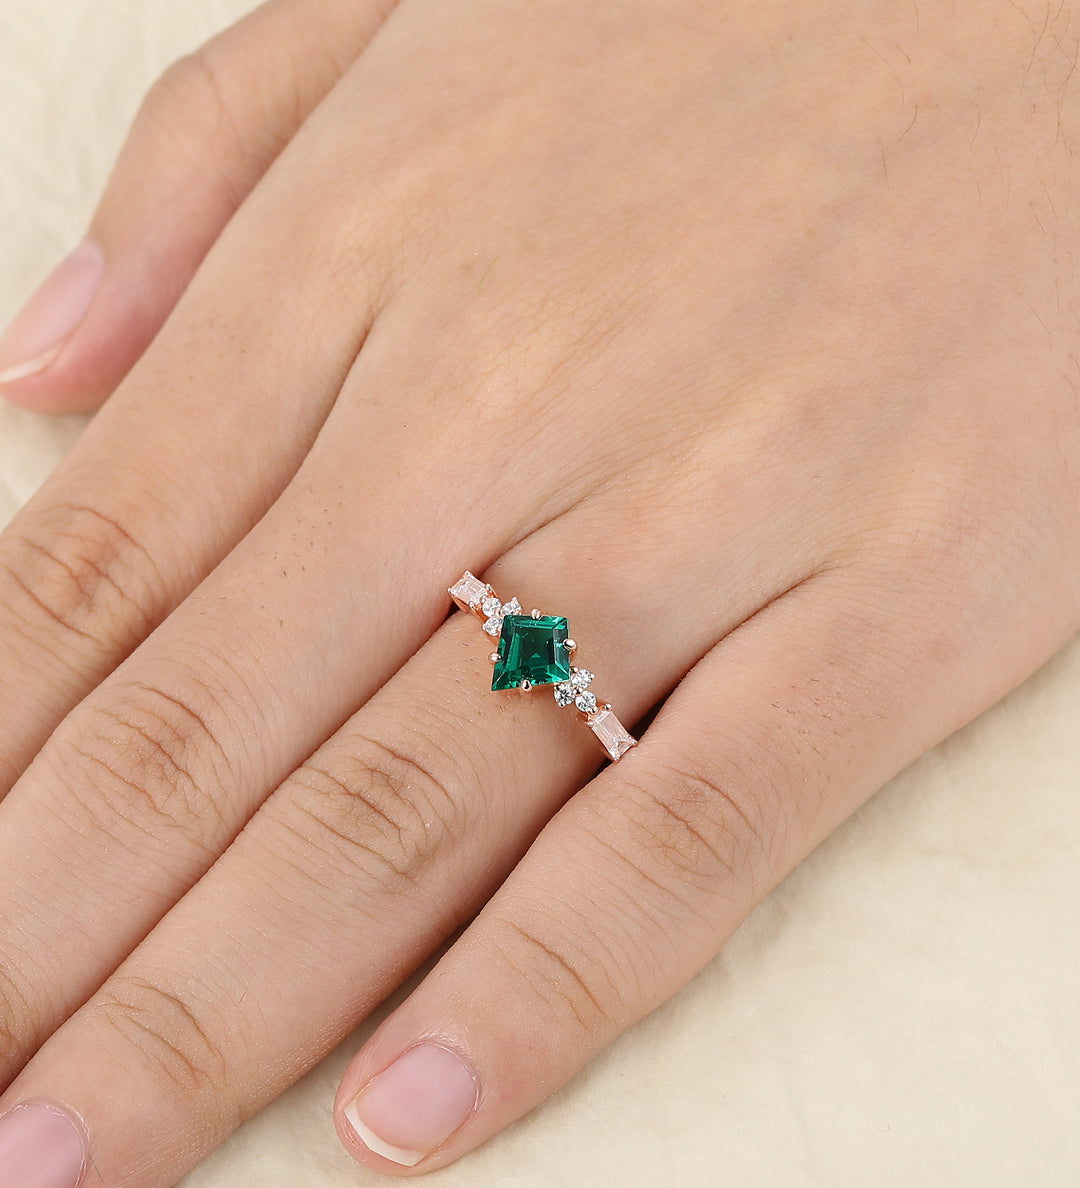 Kite Cut 6x8mm Emerald Ring Vintage Emerald Engagement Ring 14k Rose Gold Ring Gift Unique Antique Wedding Promise Anniversary Ring